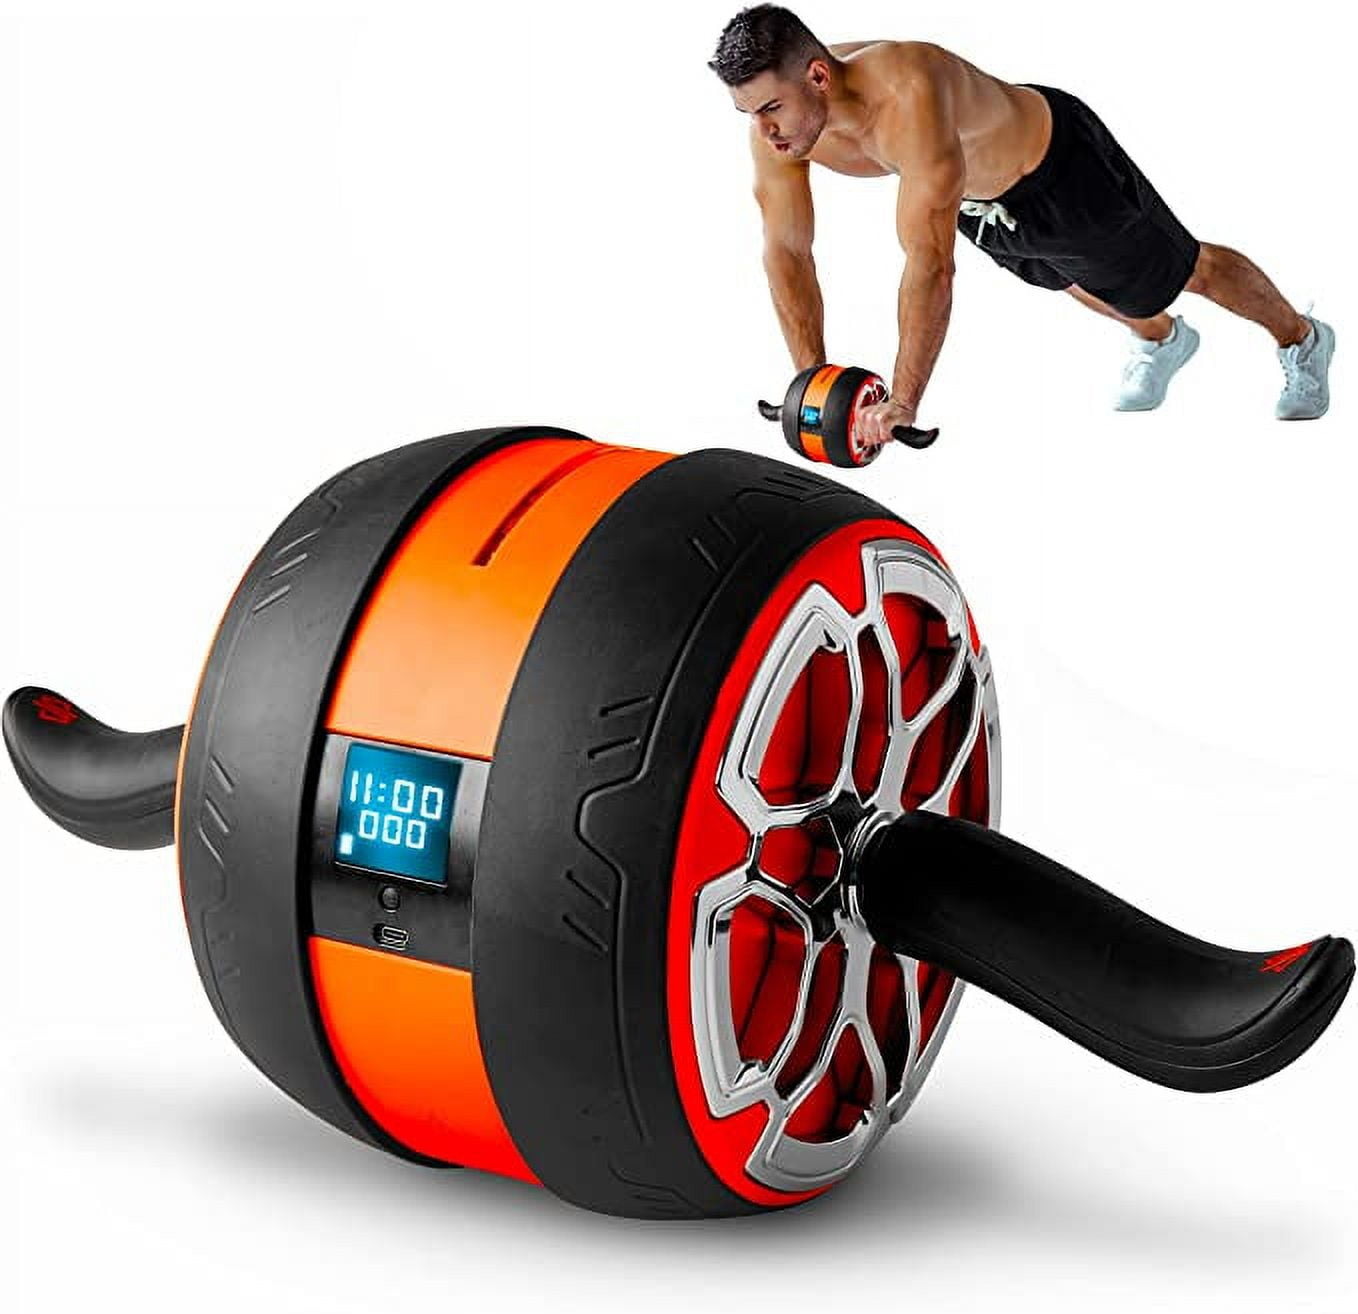 Squatz Digital Ab Roller Wheel - Ultra Wide Ab Wheel with Pilates Mat, for  Abdominal and Core Strength Training with Exercise Program, With Rubber